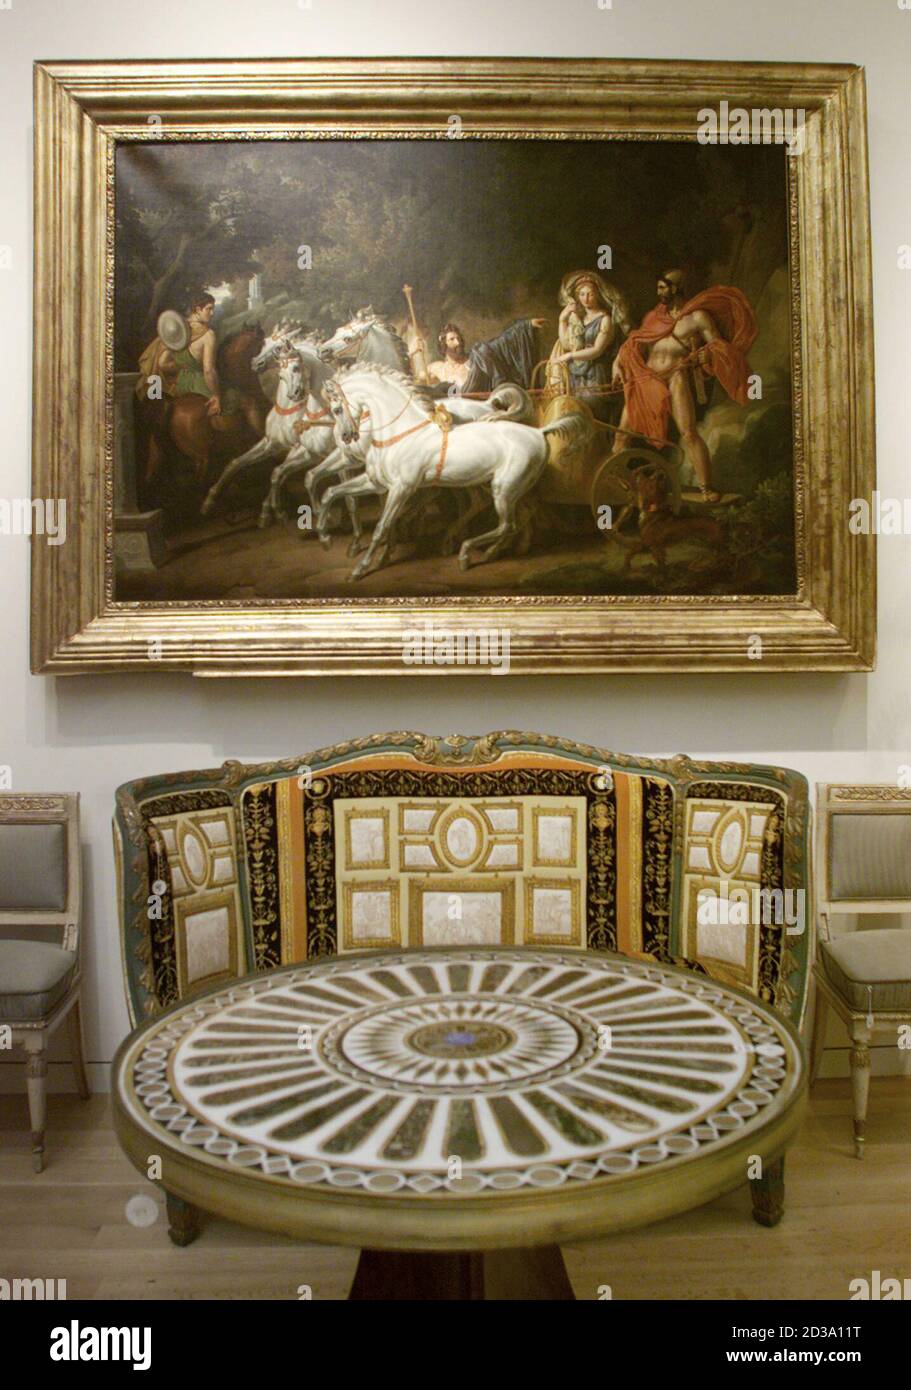 The painting "Le Retour D'Helene" and a mahogony and marble gueridon, in  foreground, are displayed at Sotheby's auction house in New York on March  30, 2001 where art and furnishings from the